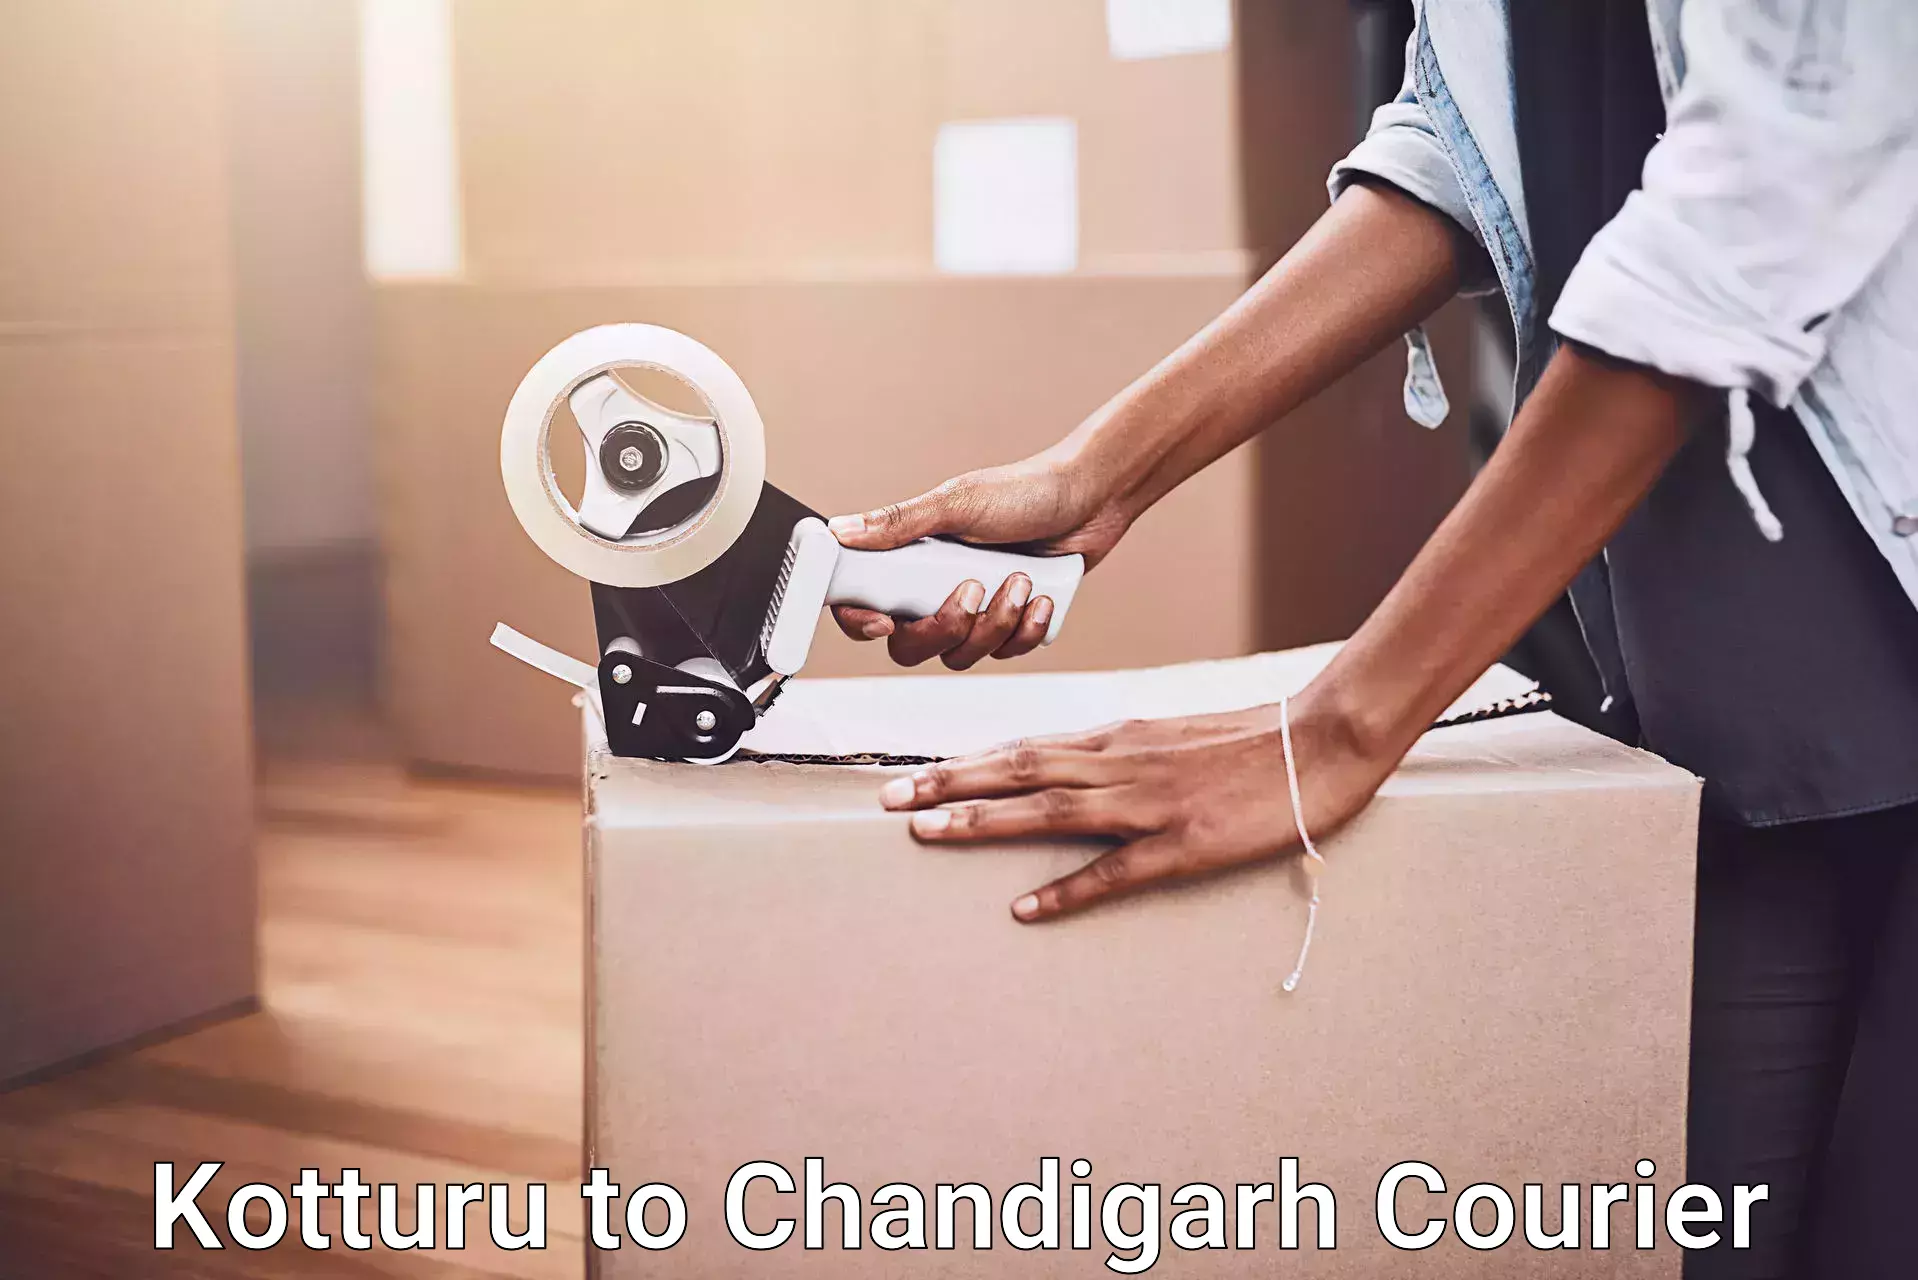 Efficient packing and moving Kotturu to Chandigarh